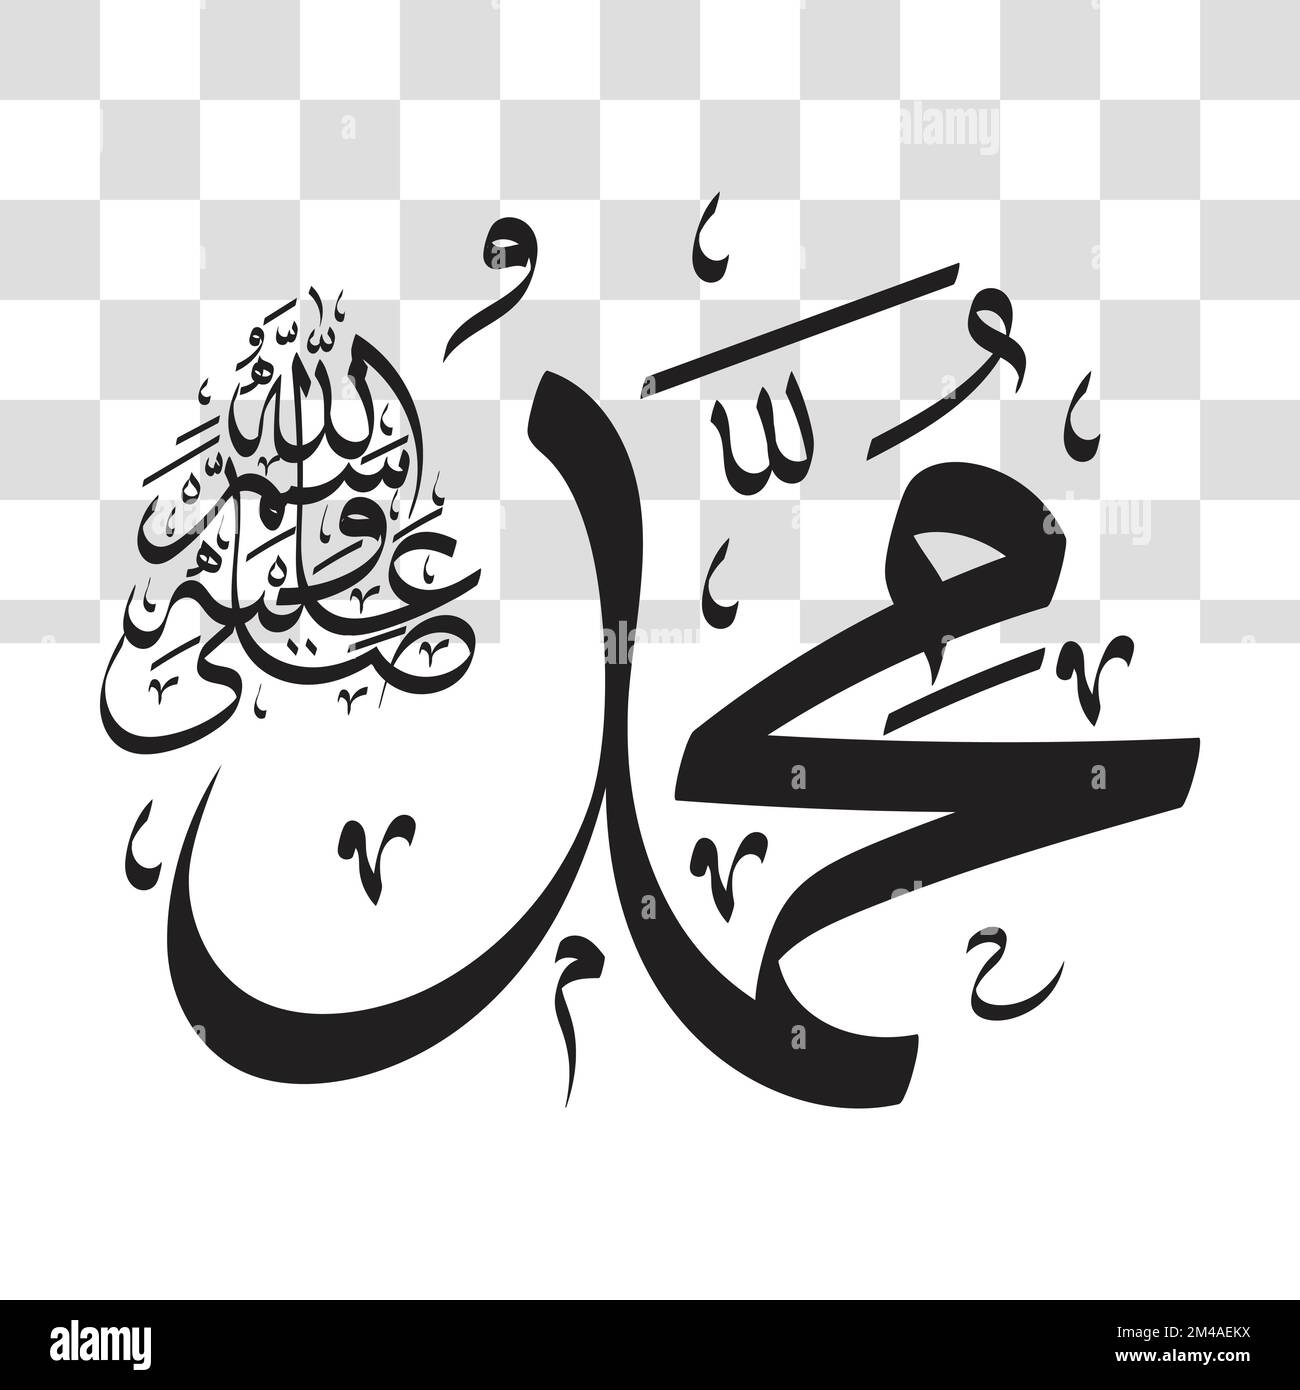 Islamic calligraphy Black and White Stock Photos & Images - Alamy